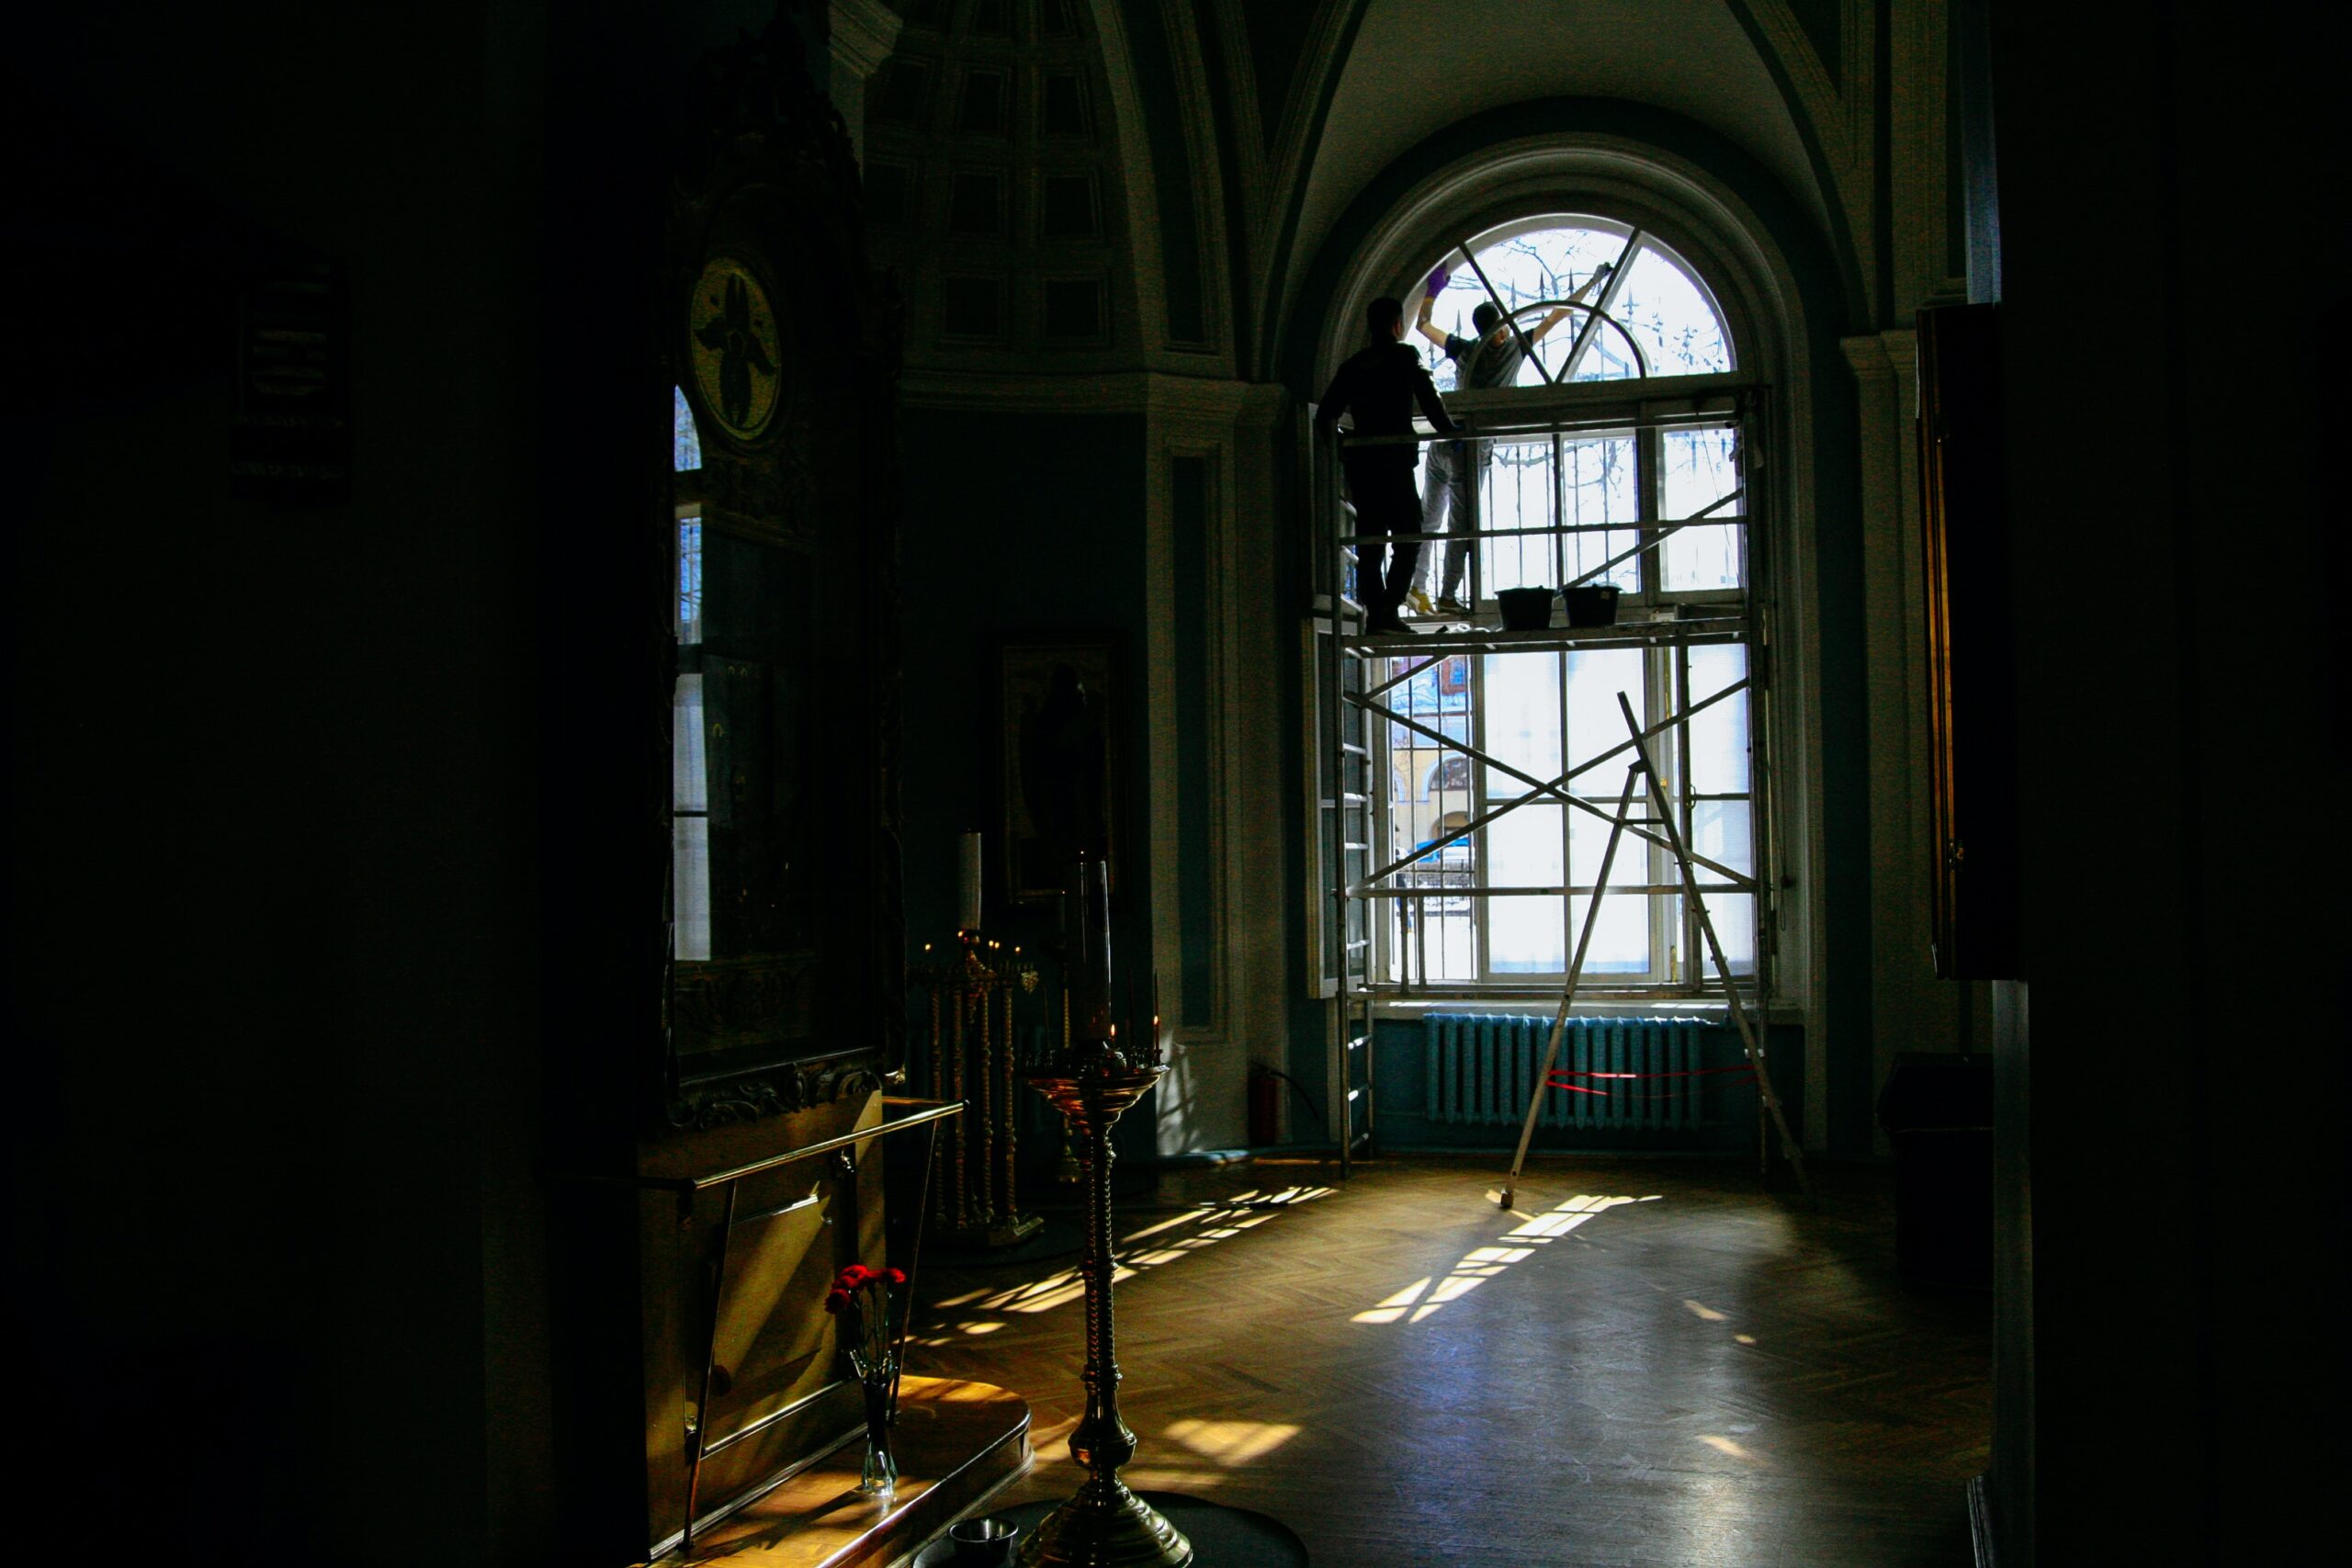 restoration and cleaning of a large arched window, backlit